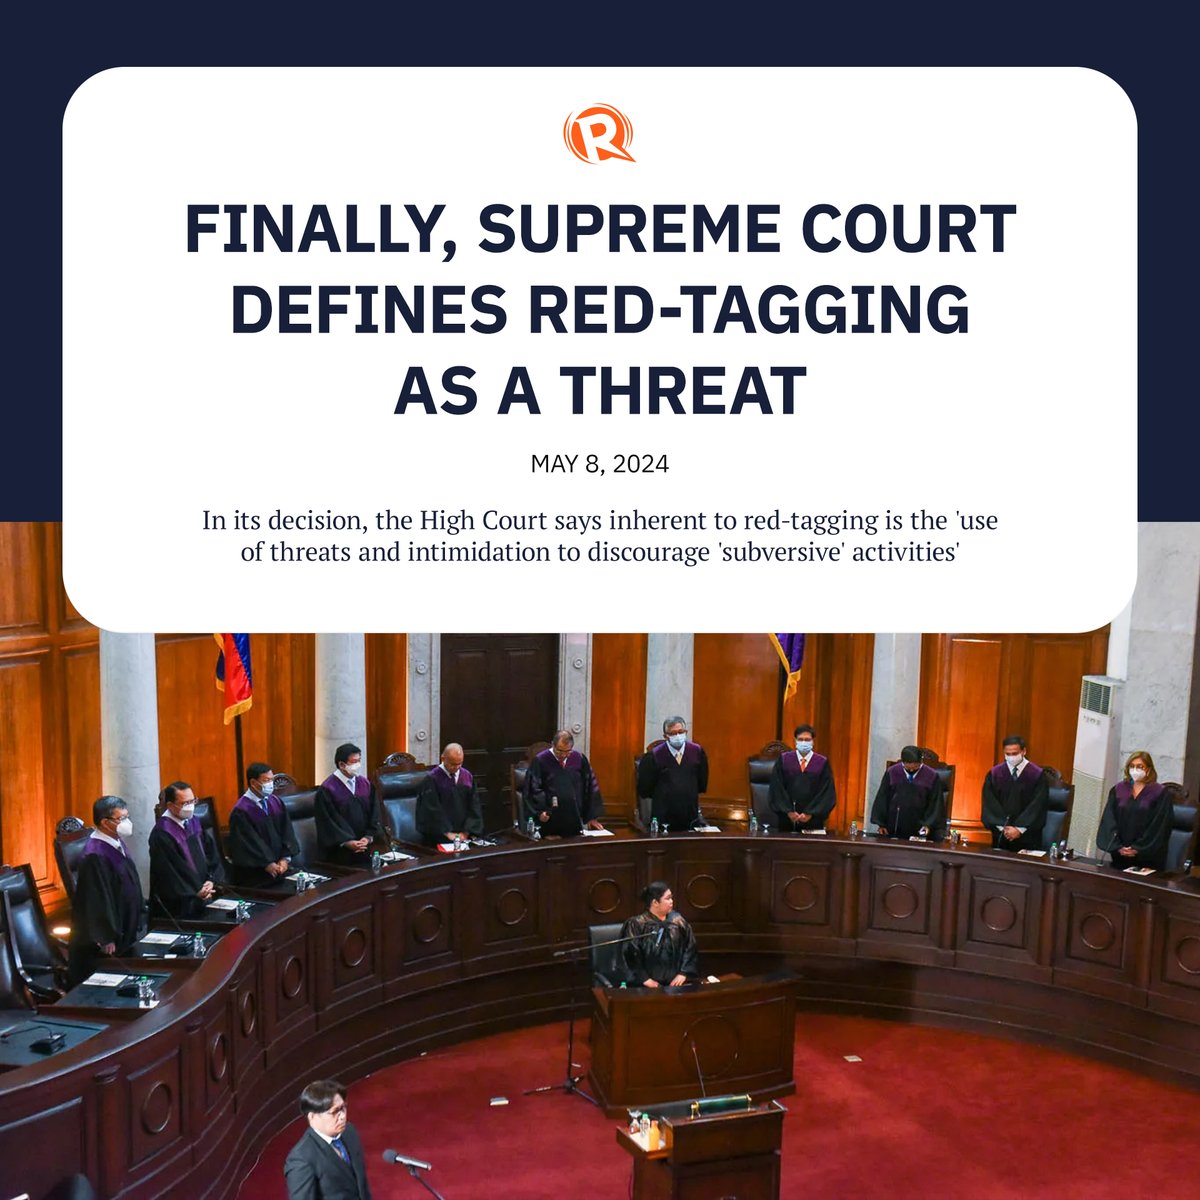 In a 39-page decision penned by Associate Justice Rodil Zalameda, the High Court defined red-tagging as an act that threatens a person’s constitutional right to life, liberty, and security. trib.al/eSSkYcO